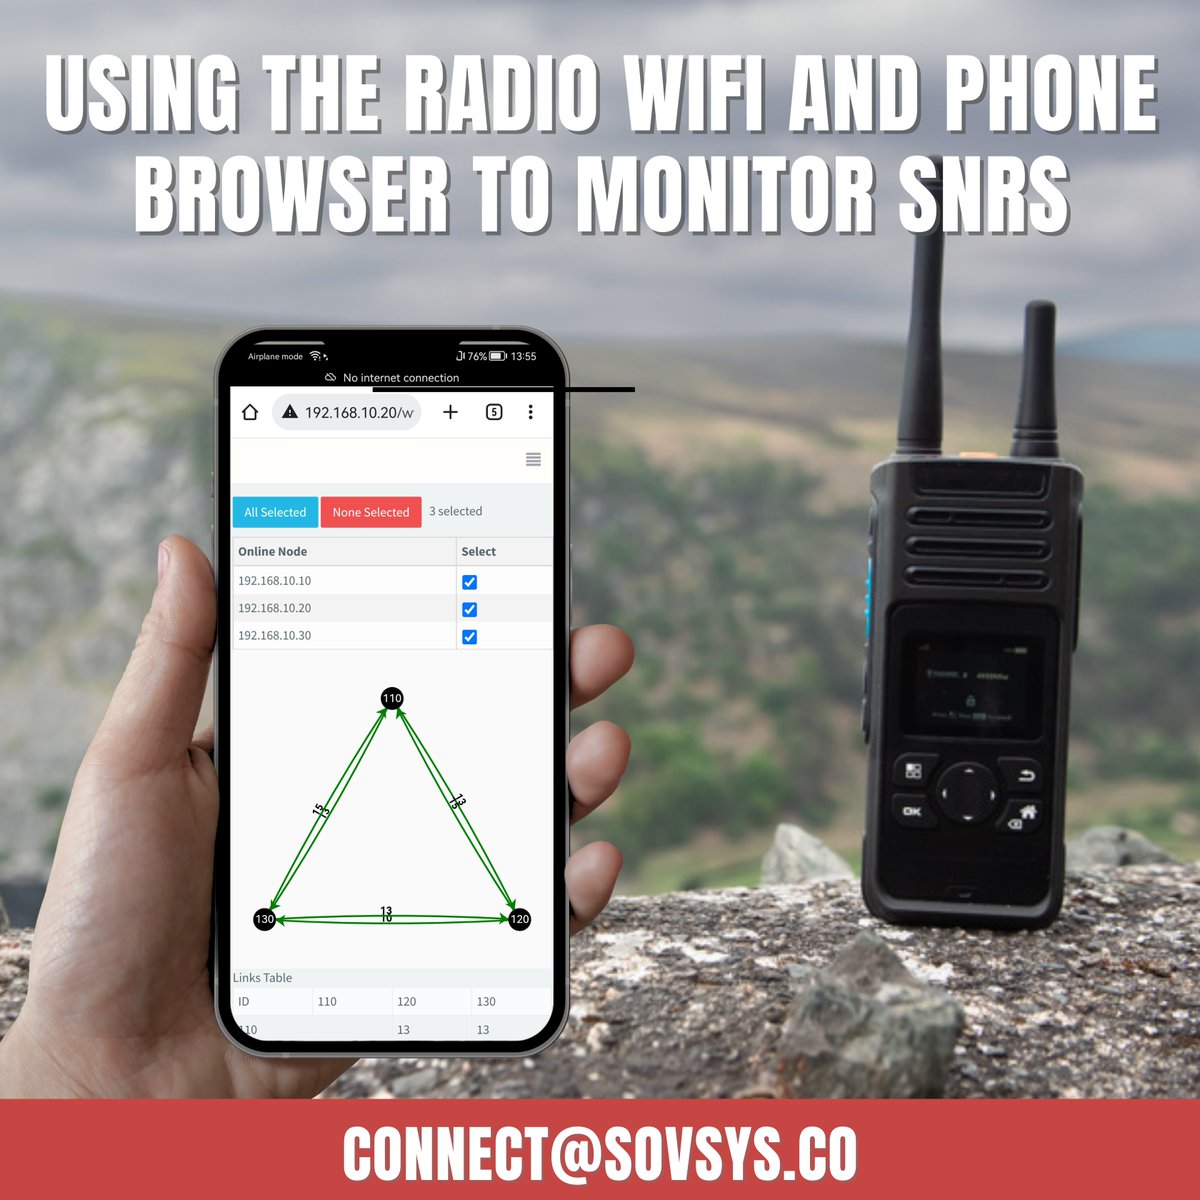 One of the uses of the radios WiFi is to connect a device such as smartphone and monitor SNR as you are the move.  #mesh #ipmesh #meshradio #meshnetwork #firstresponder #emergencyresponse #securecomms #securecommunications #sovsys #leo #bordercontrol #convoy #security